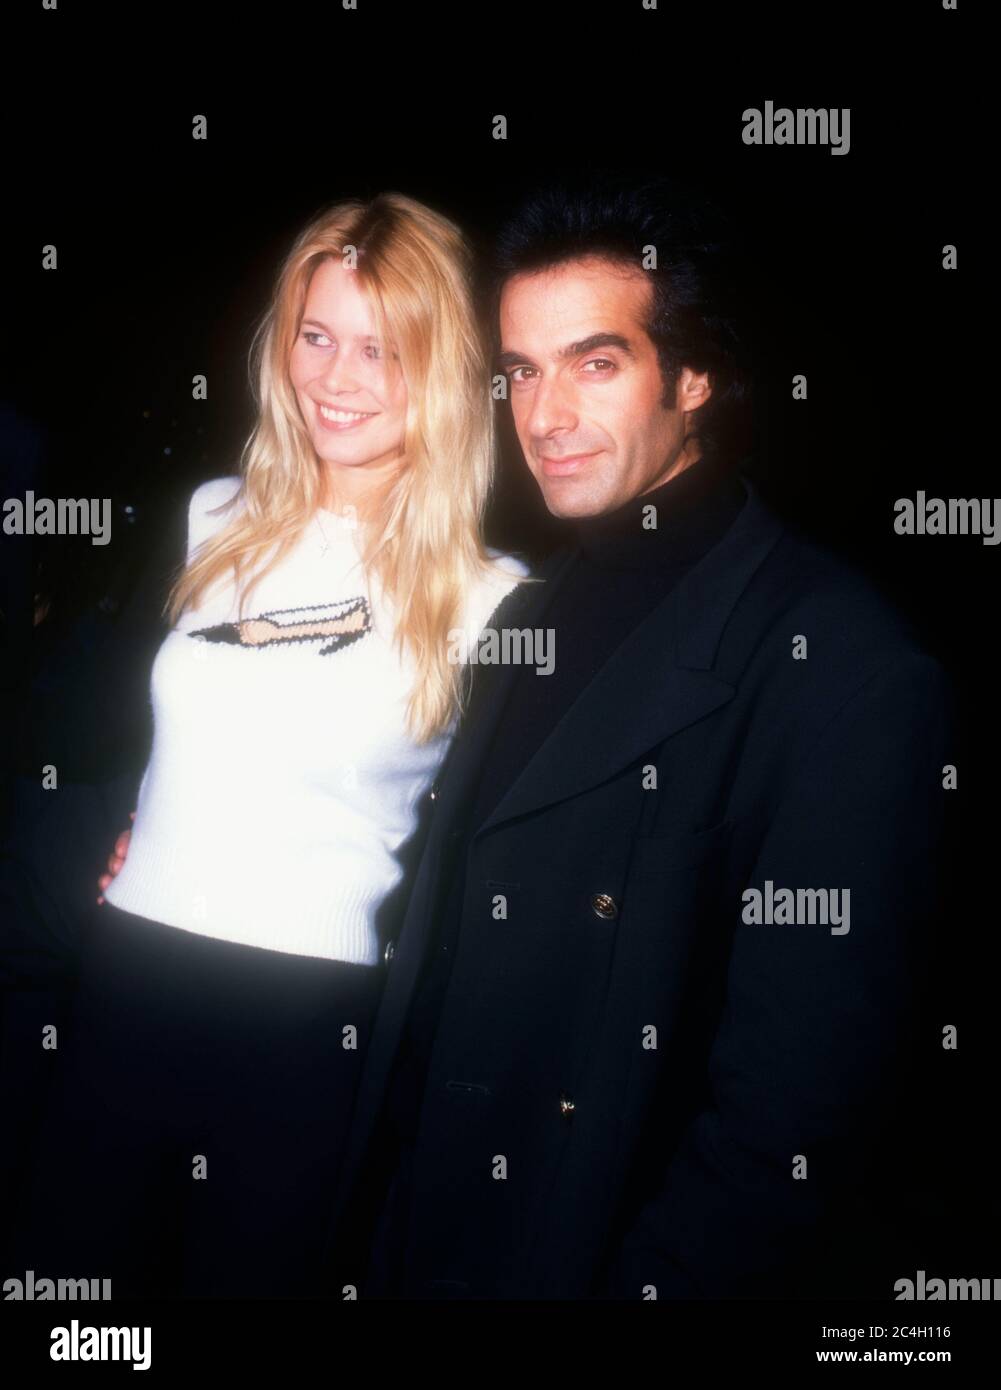 Hollywood, California, USA 15th November 1995 Model Claudia Schiffer and magician David Copperfield attend Miramax' 'Two Bits' Premiere on November 15, 1995 at Hollywood Galaxy Theatre in Hollywood, California, USA. Photo by Barry King/Alamy Stock Photo Stock Photo